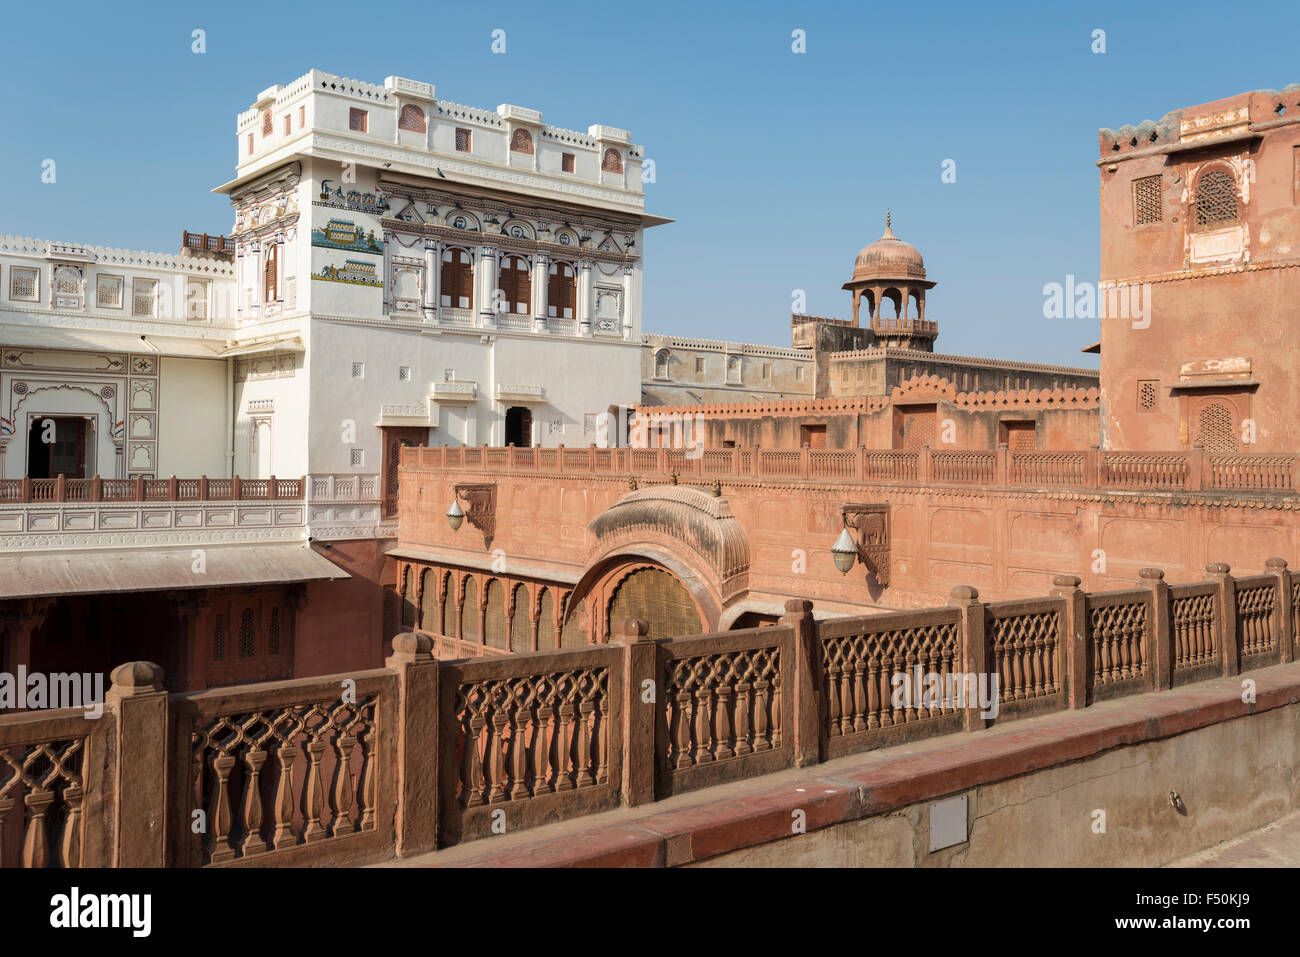 One of the inner courtyards of Junagarh Fort, originally called Chintamani. It was built in 16th century and is one of the main Stock Photo